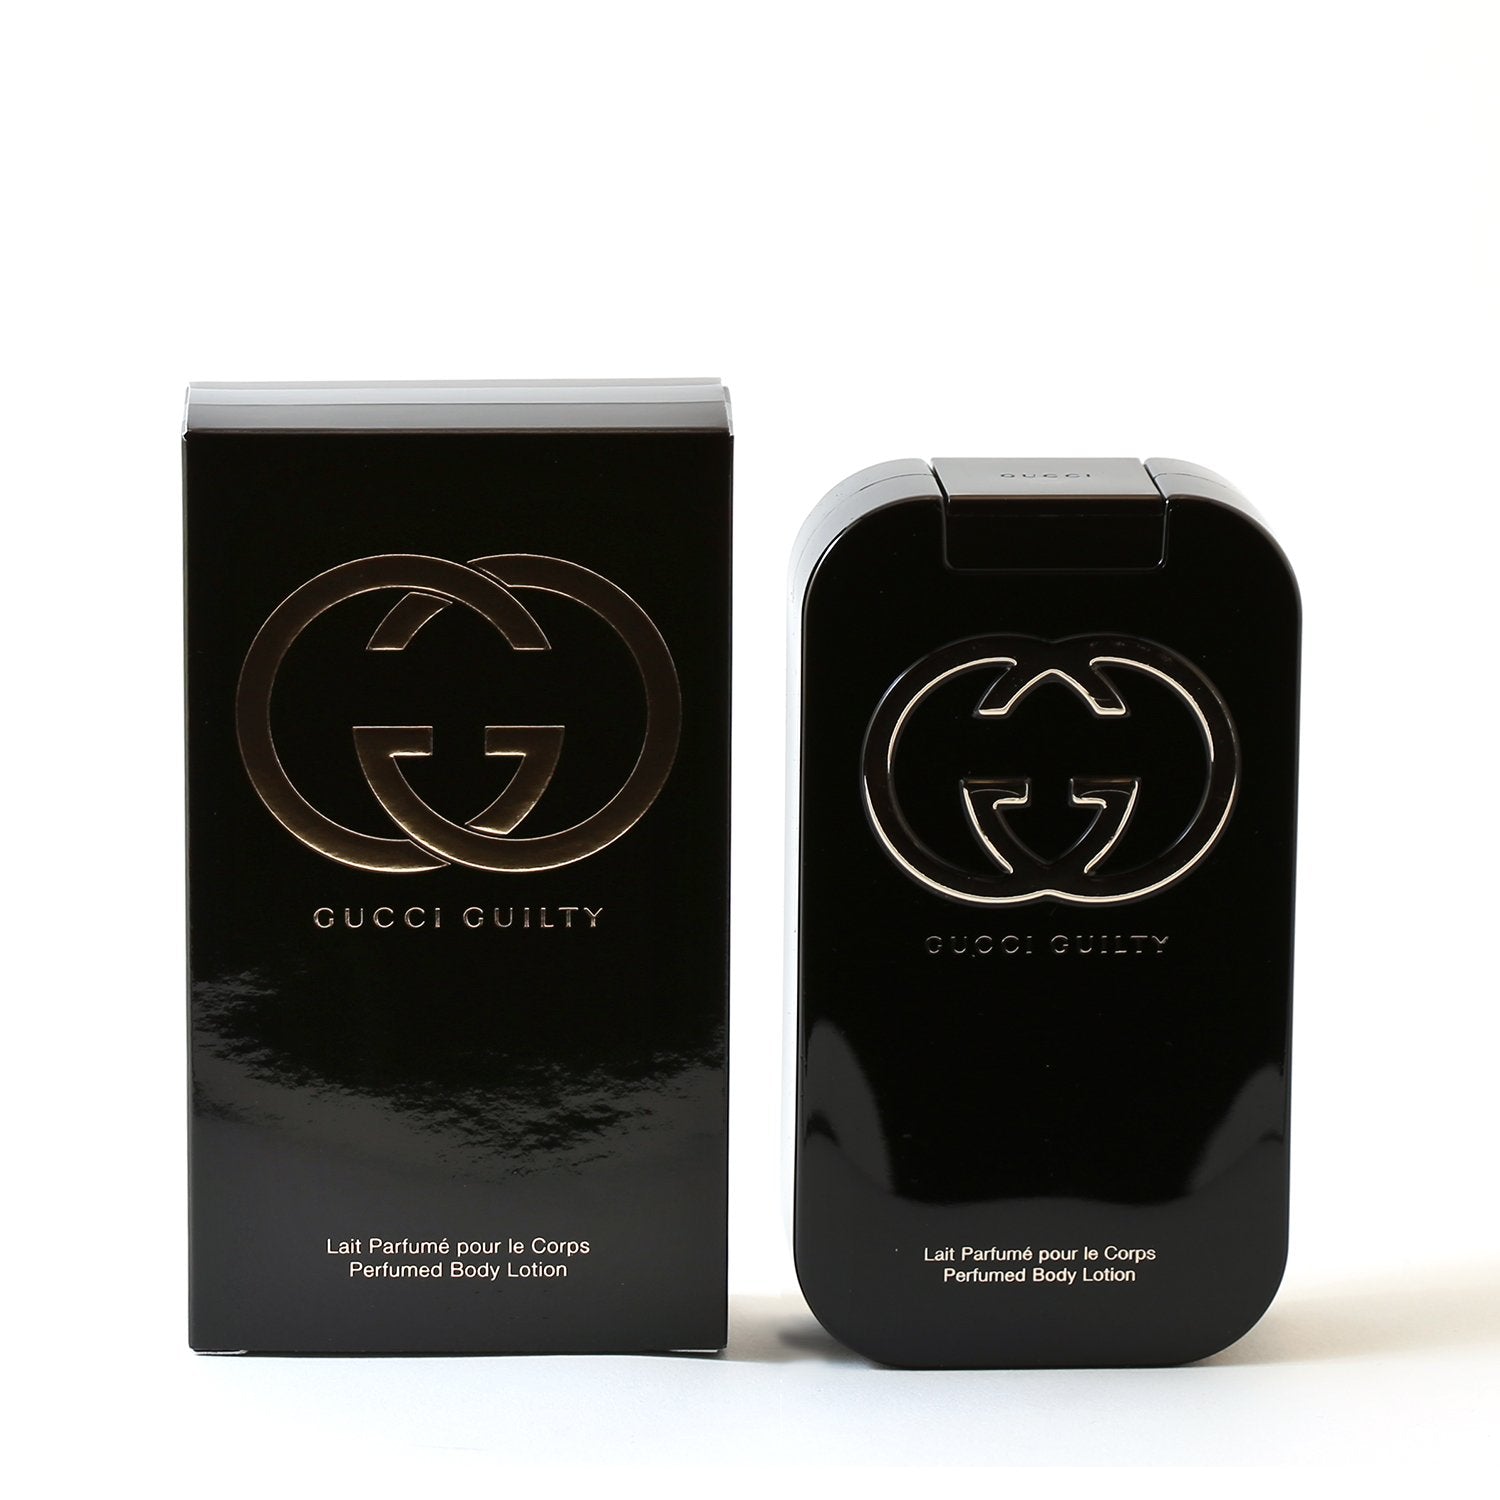 GUCCI GUILTY FOR WOMEN - BODY LOTION, Fragrance